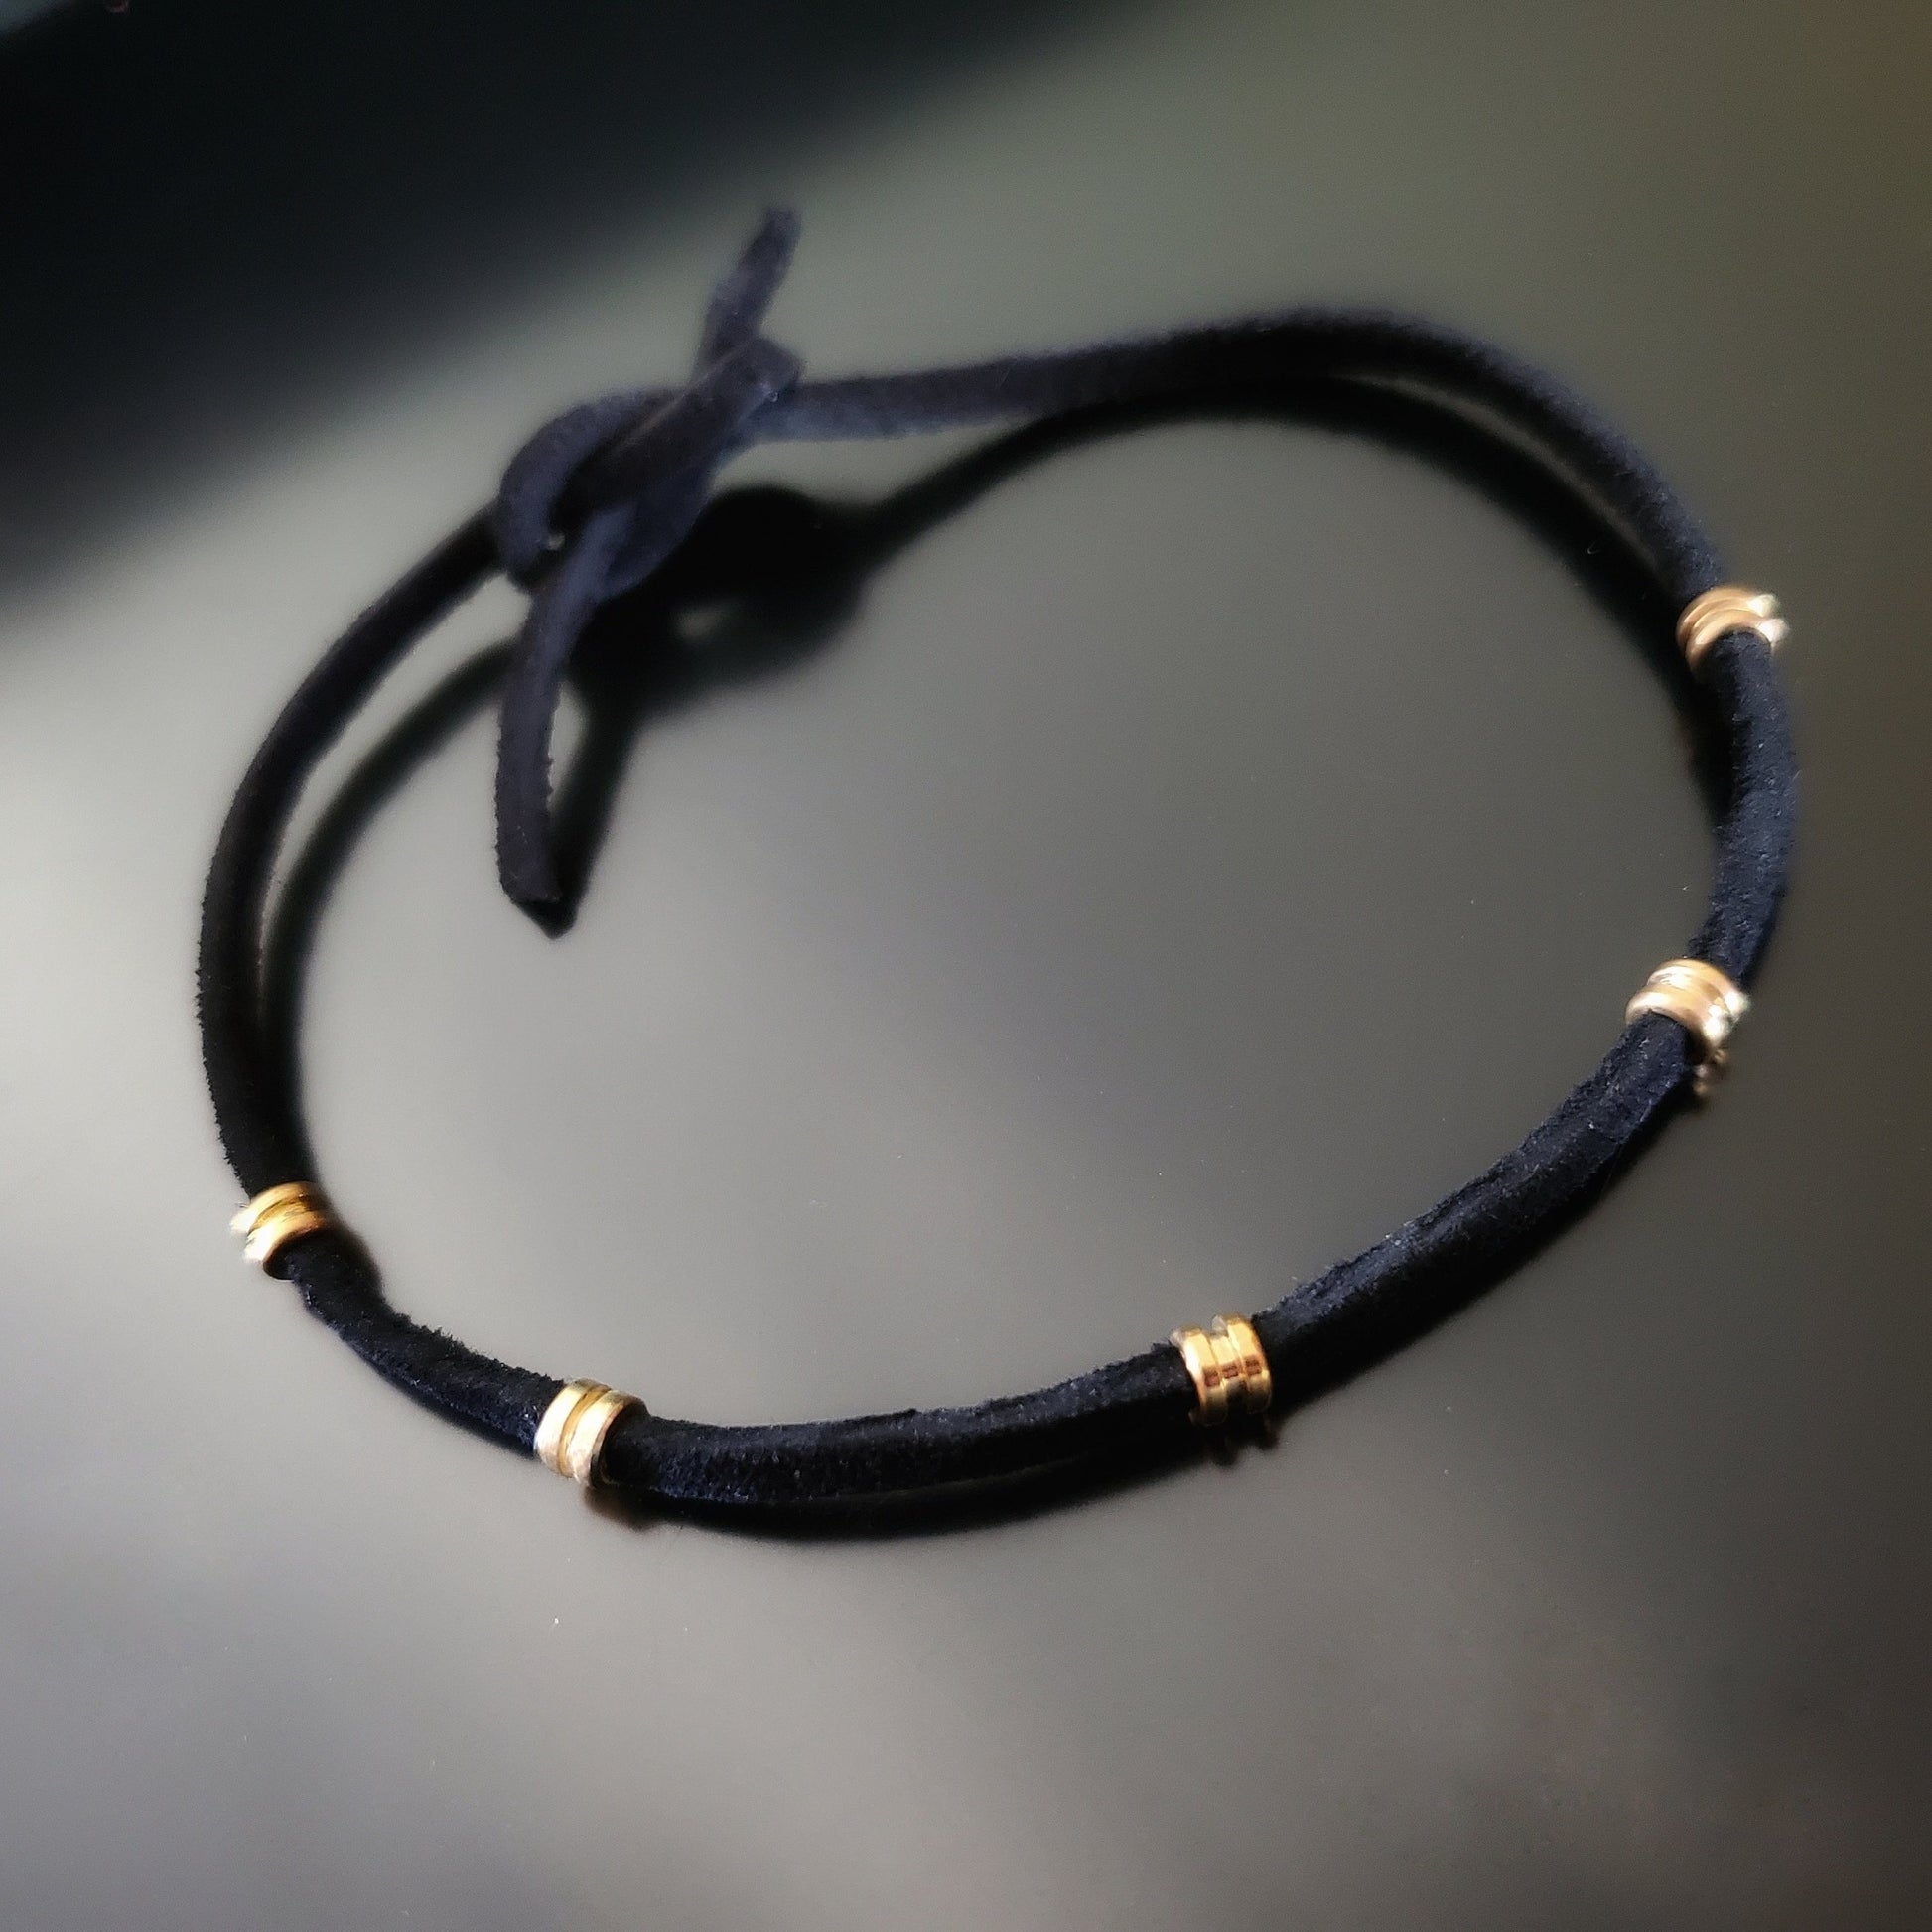 black bracelet made from a suede cord and gold coloured guitar string ballends